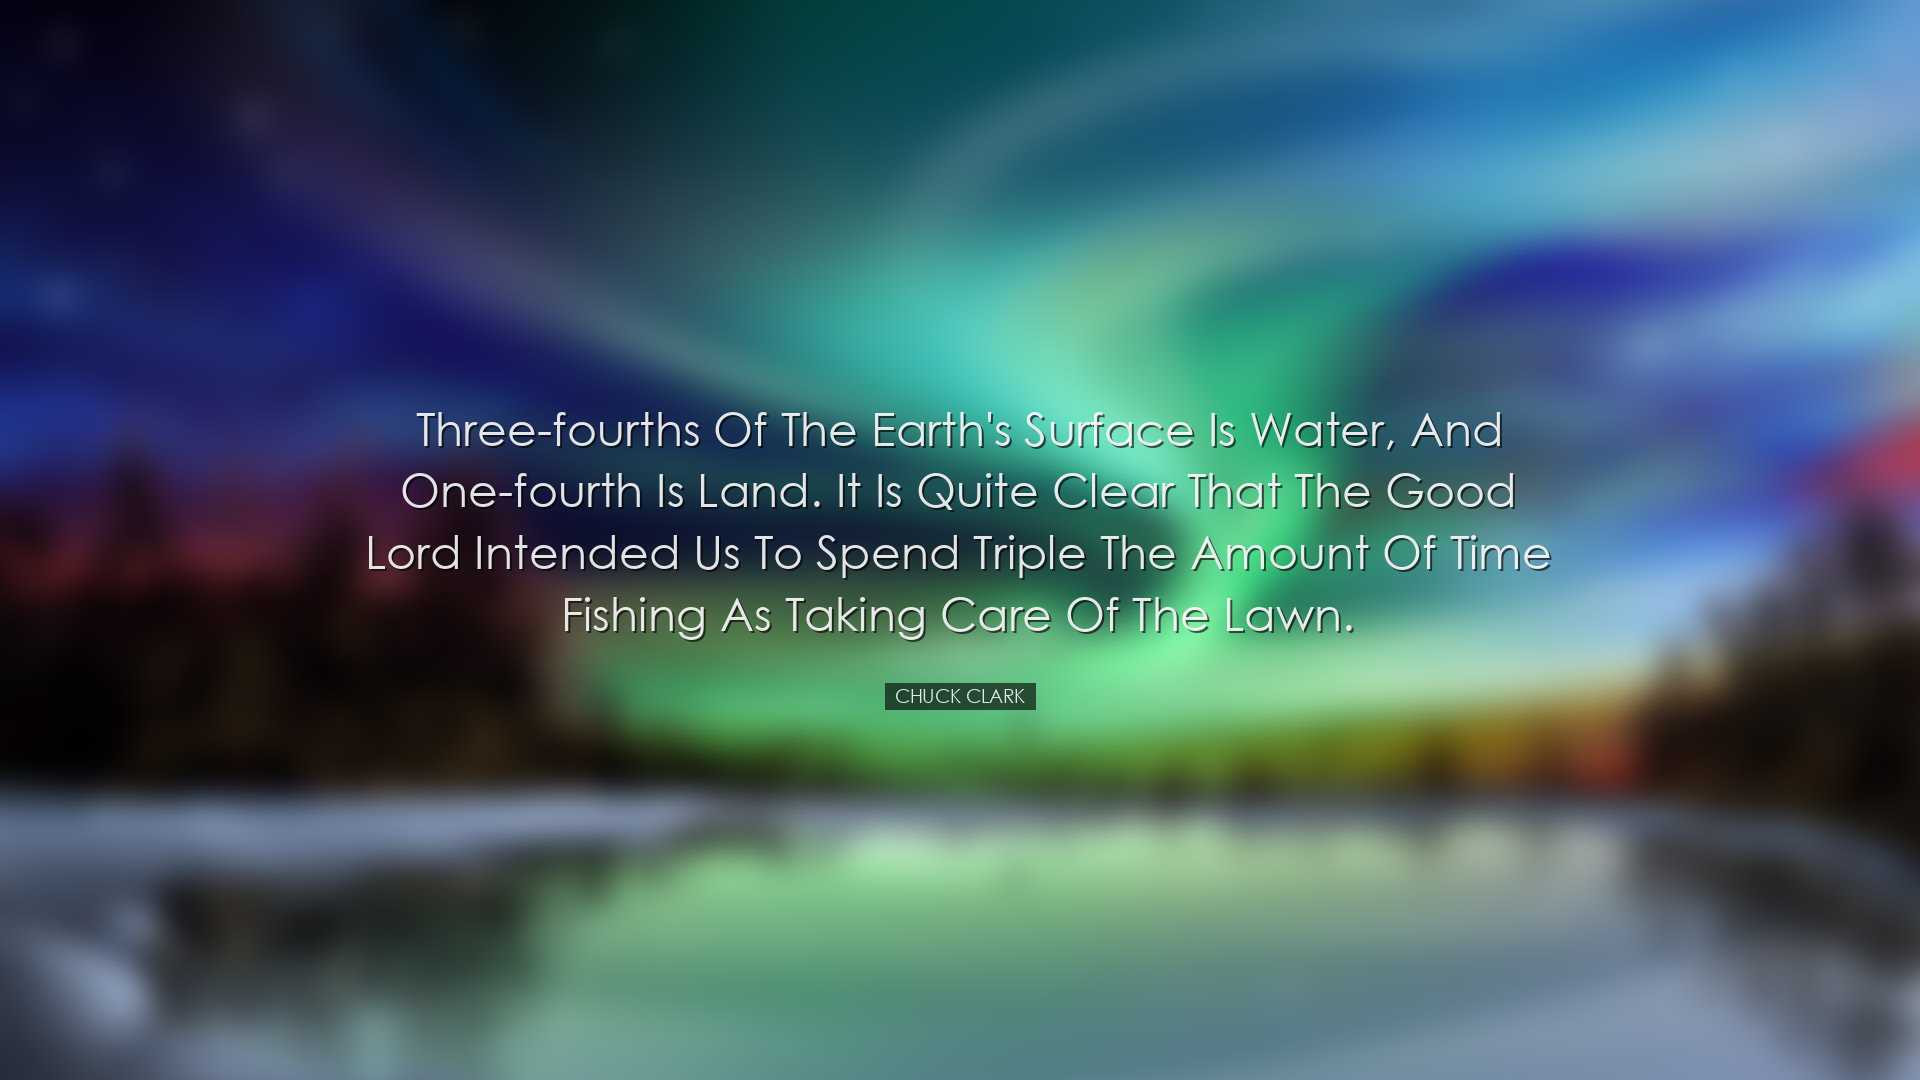 Three-fourths of the Earth's surface is water, and one-fourth is l